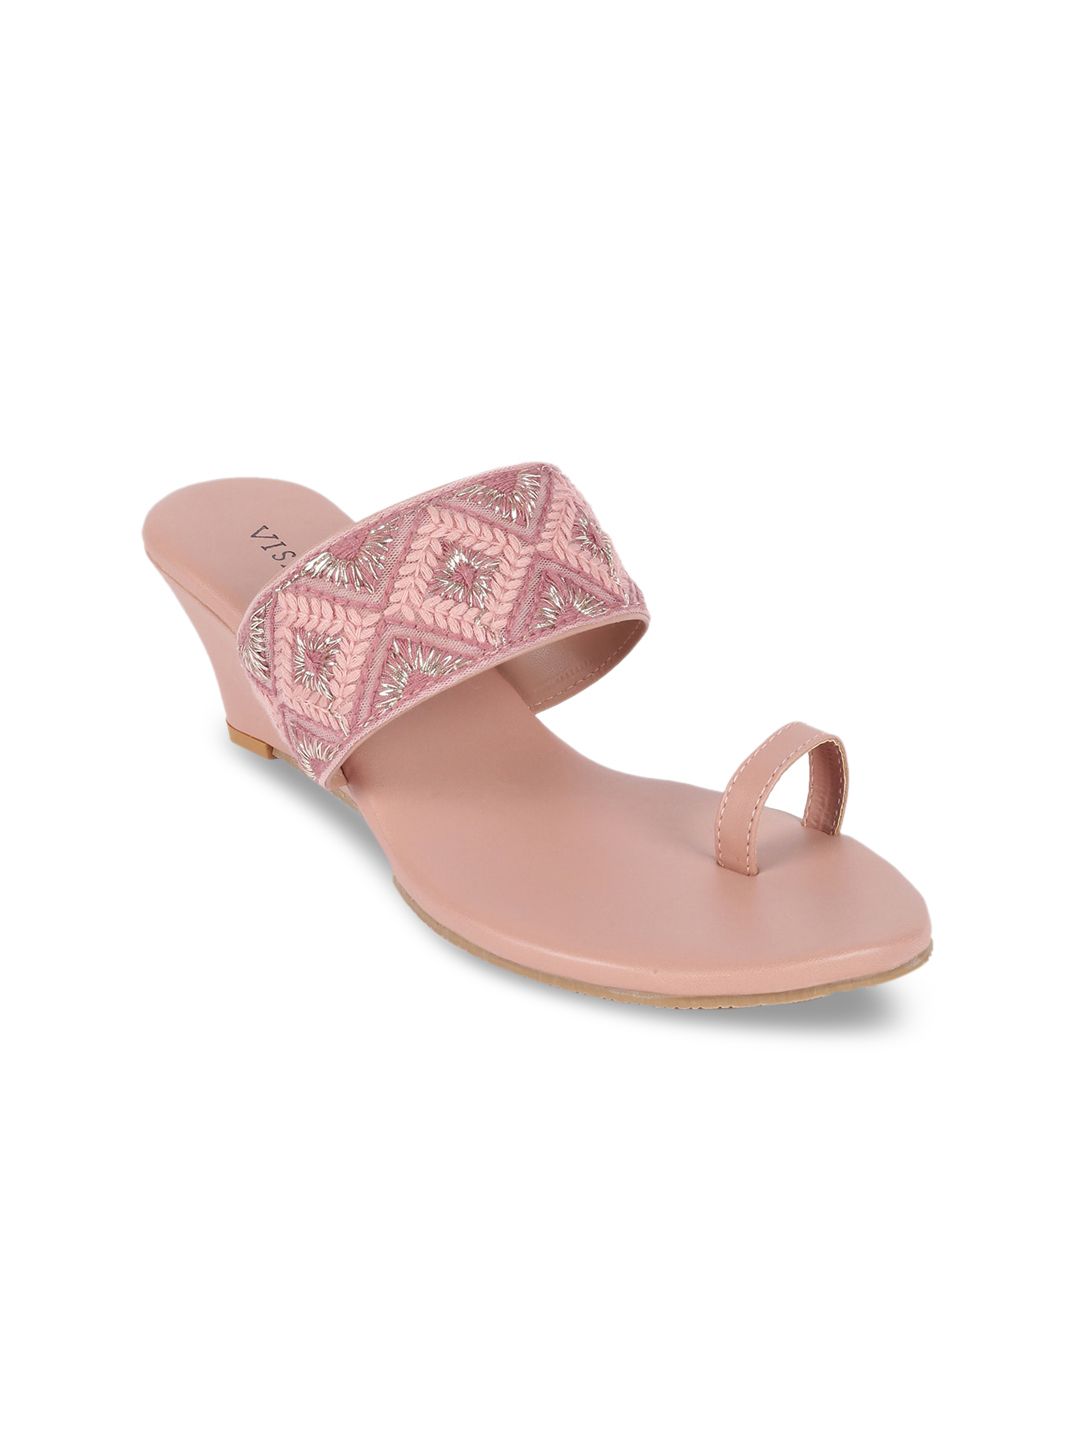 Vishudh Women Peach-Coloured Embroidered Open Toe Wedges Price in India